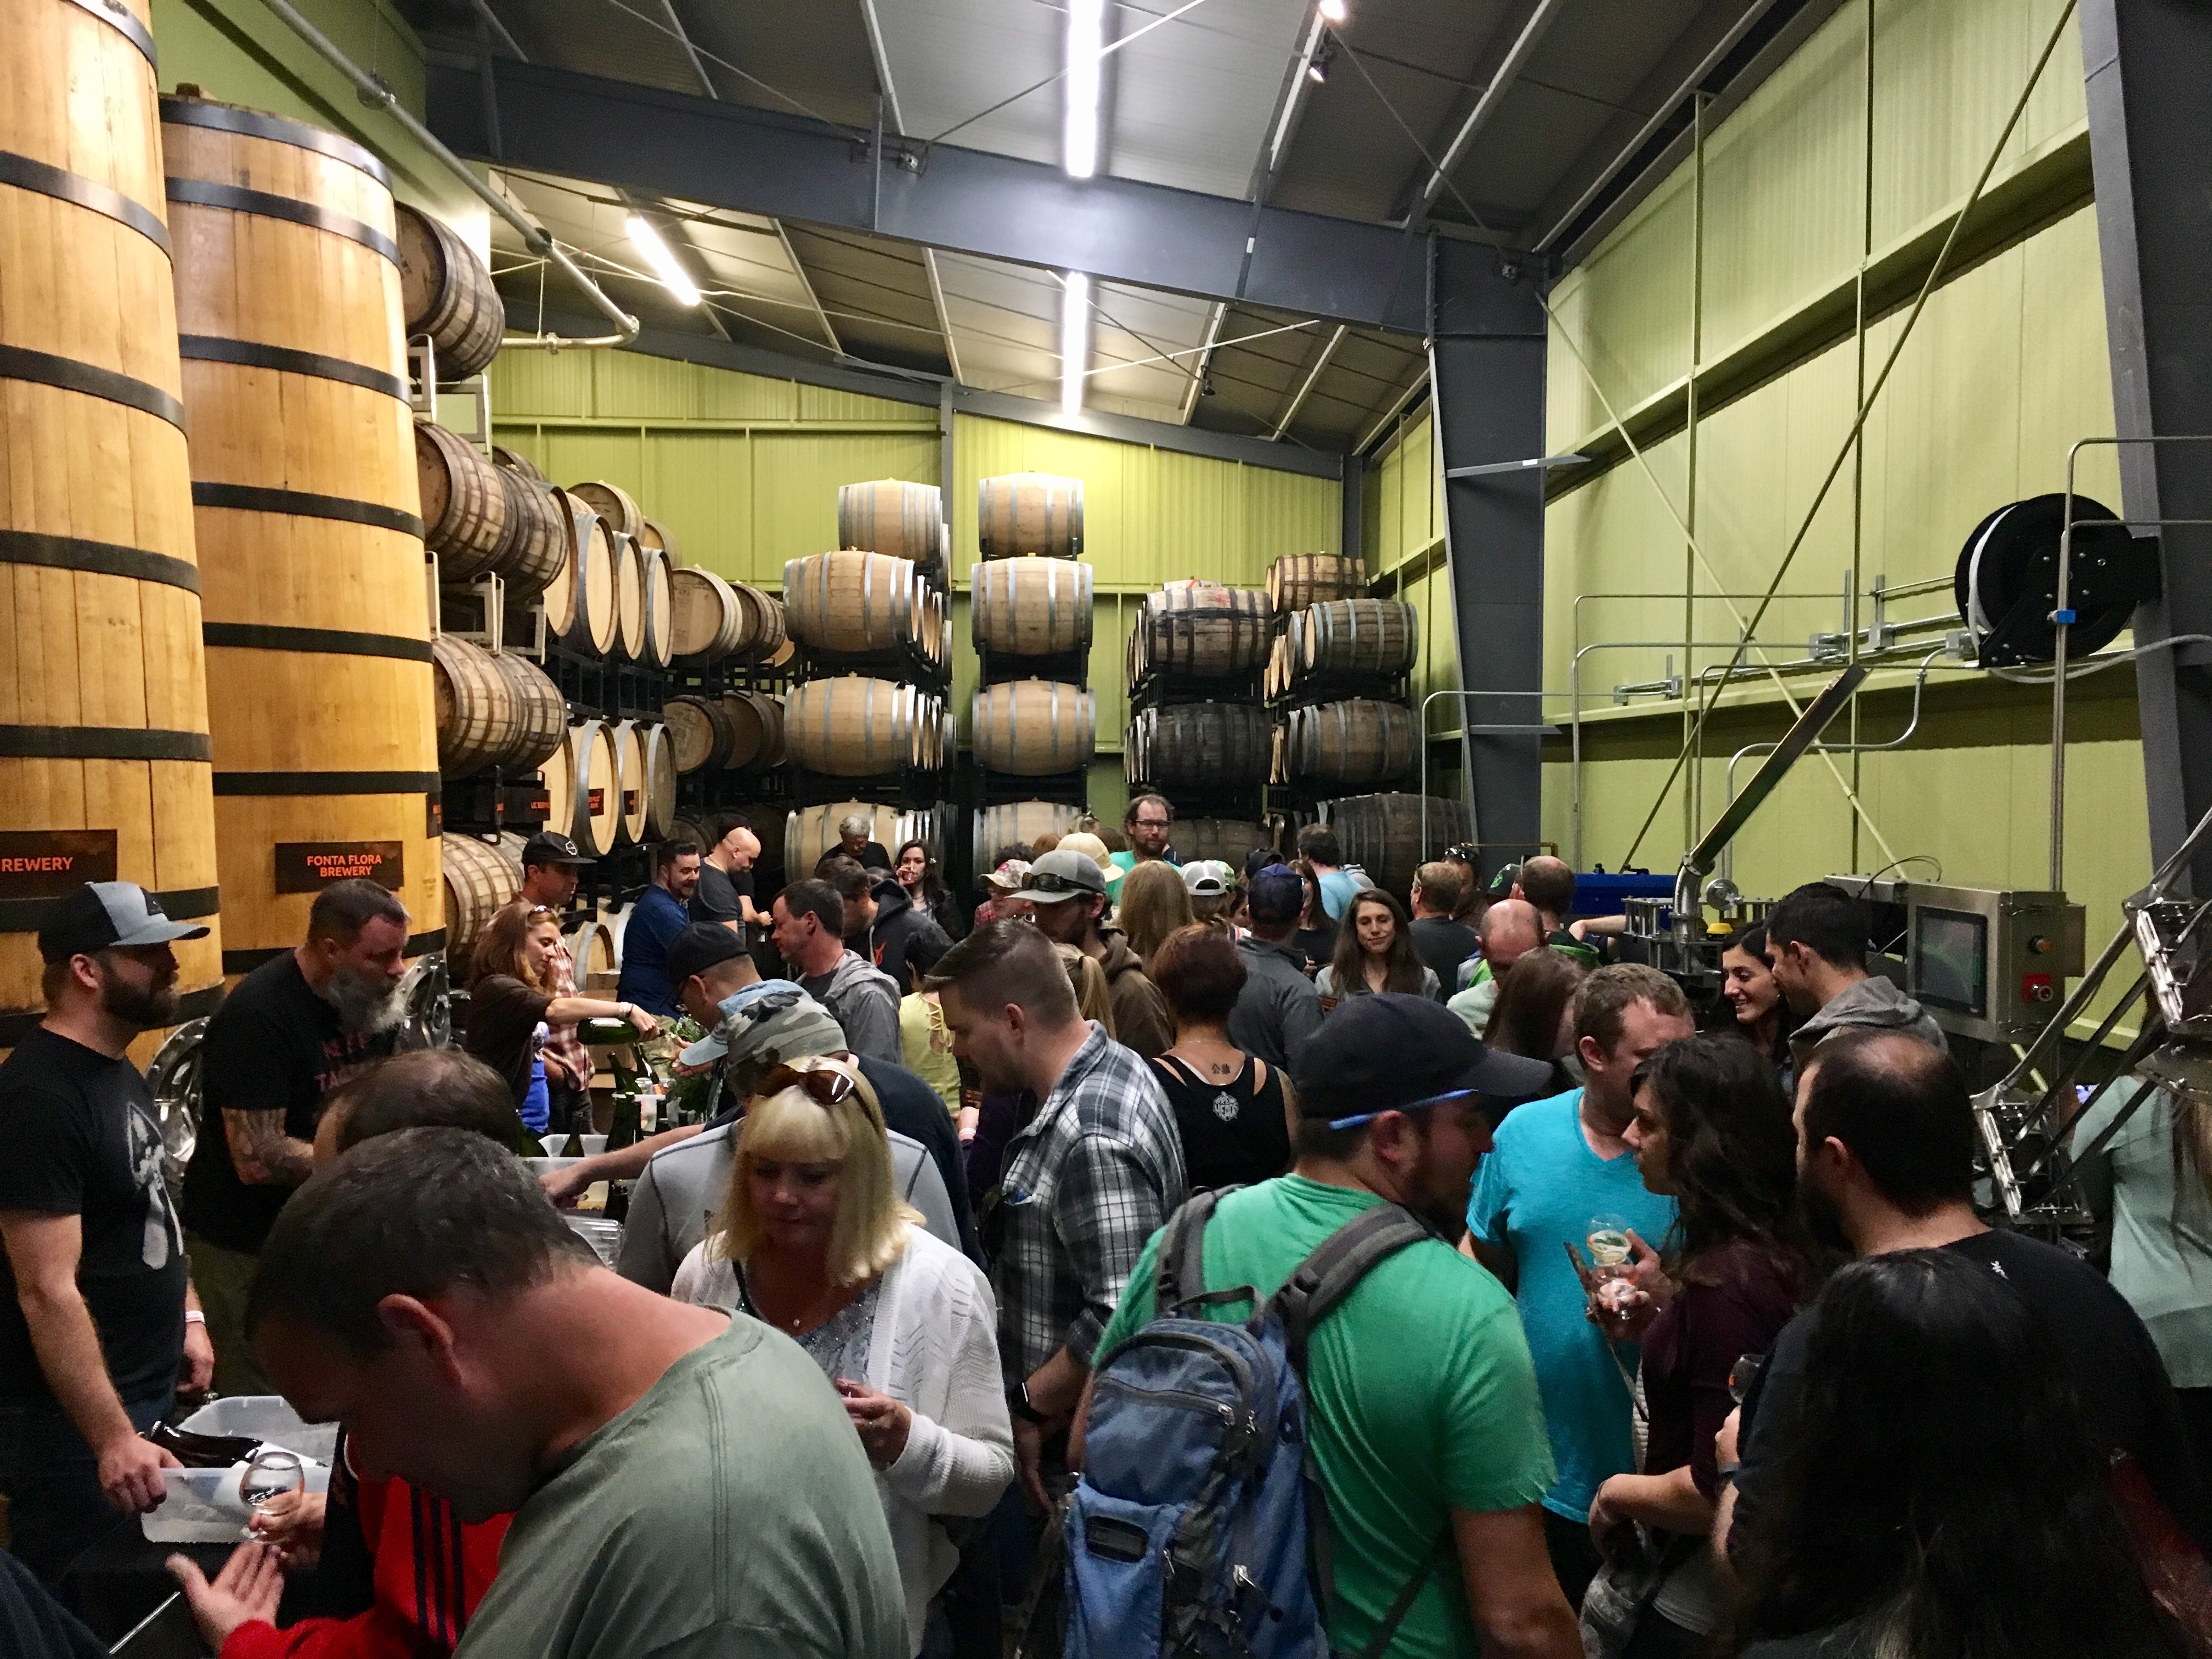 A festive crowd at The Culmination Festival held at Anchorage Brewing.